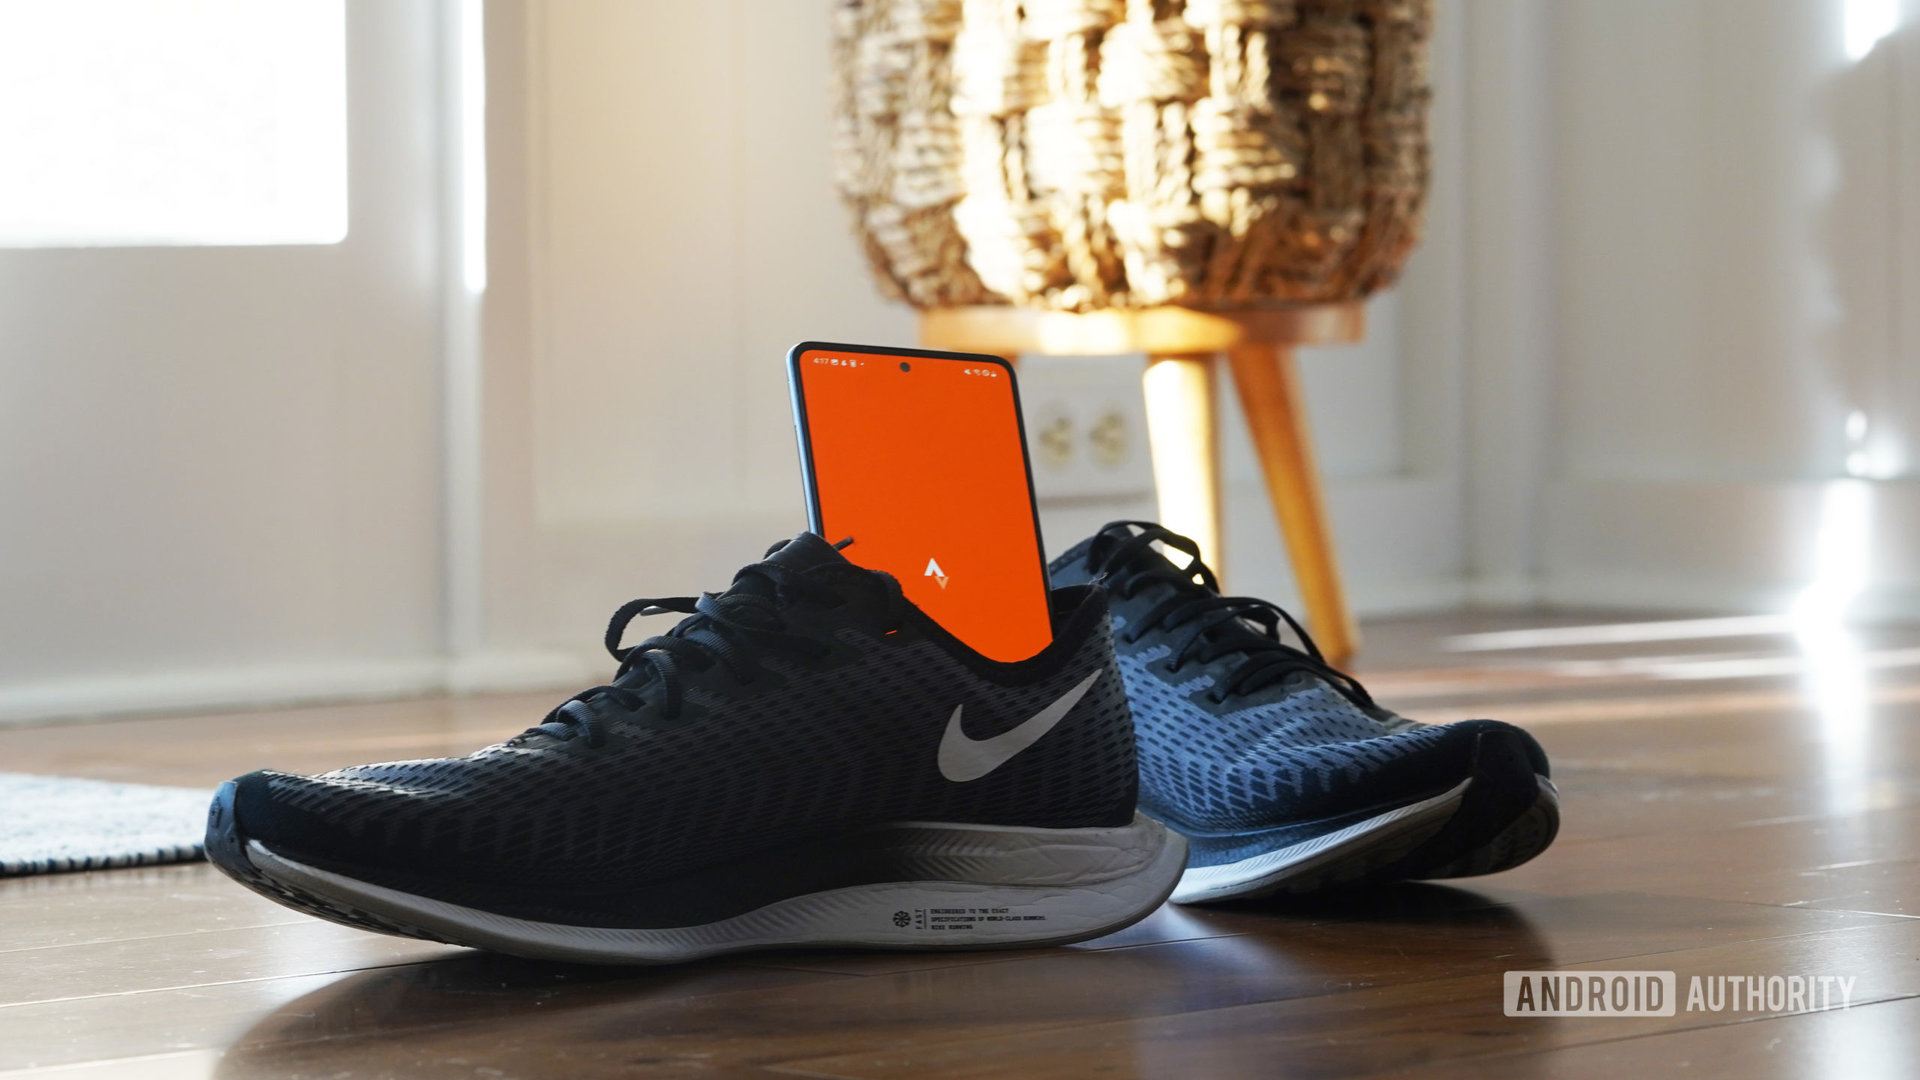 A Galaxy A51 rests in a running sneaker, displaying the Strava app logo.